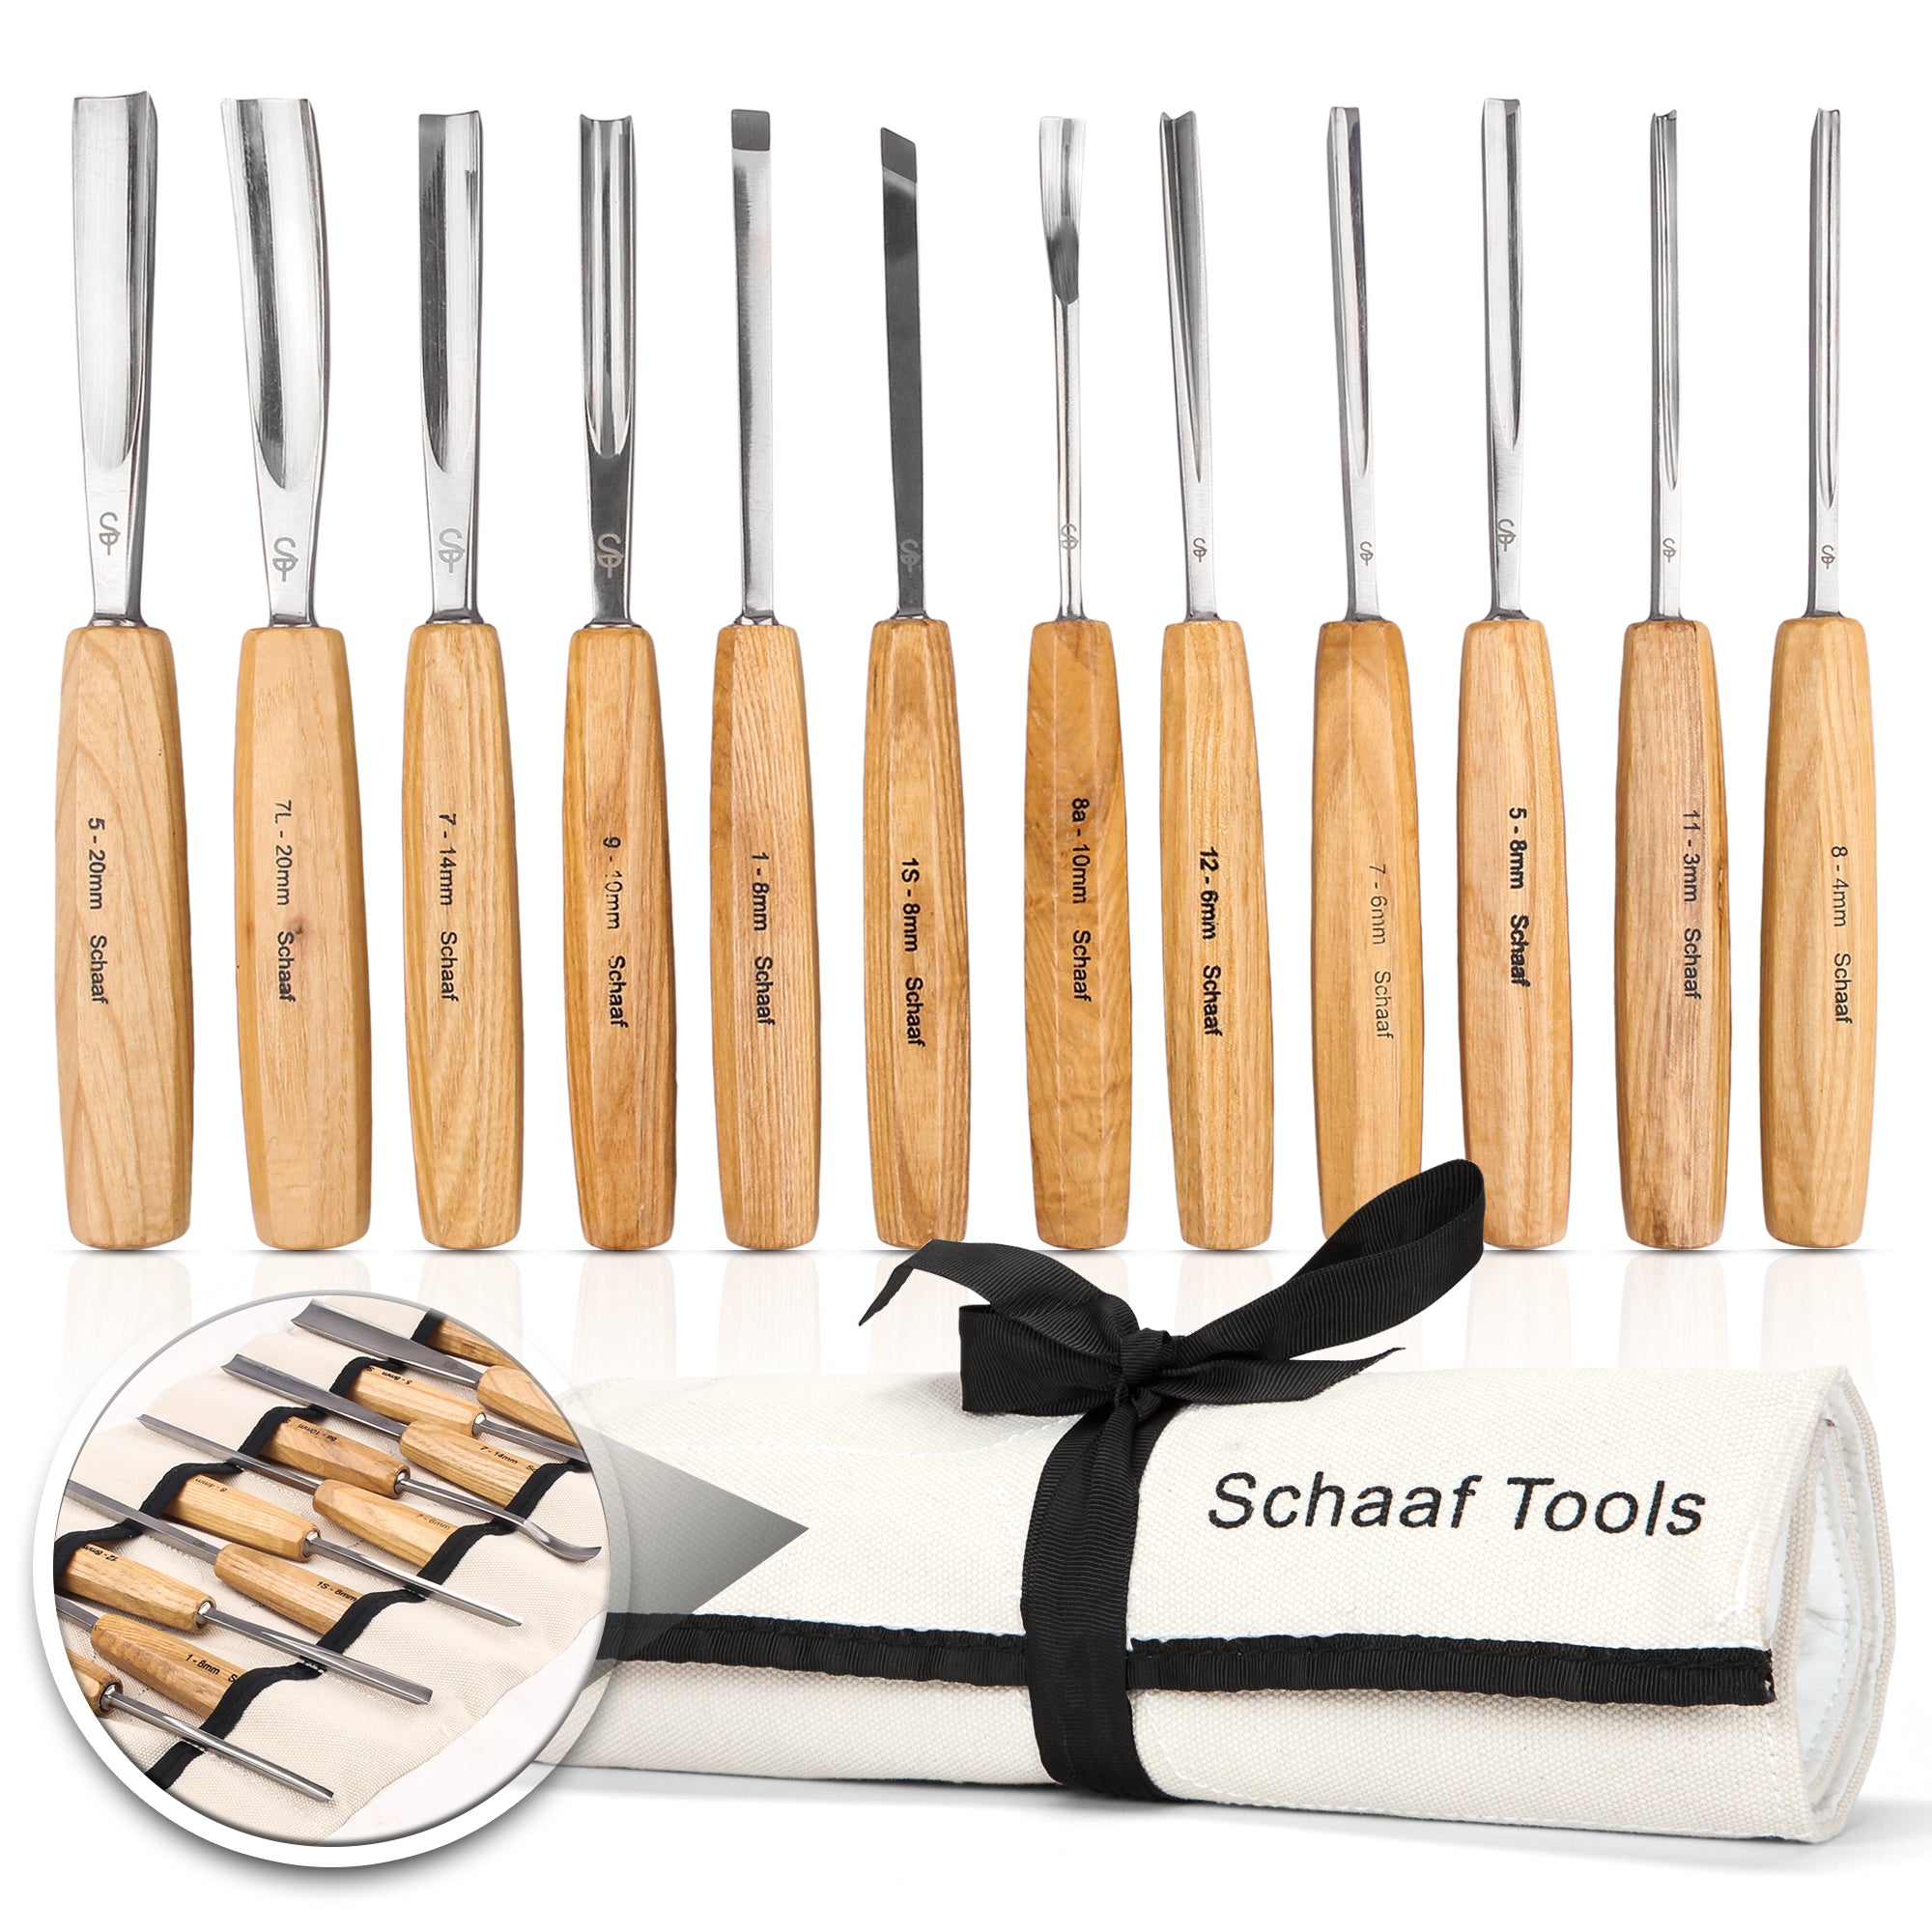 Schaaf Wood Carving Tools Deluxe Wood Carving Kit | Includes Detail Knife, Chip Carving Knife, Sloyd Wood Carving Knife, Spoon Carving Kit | Adult